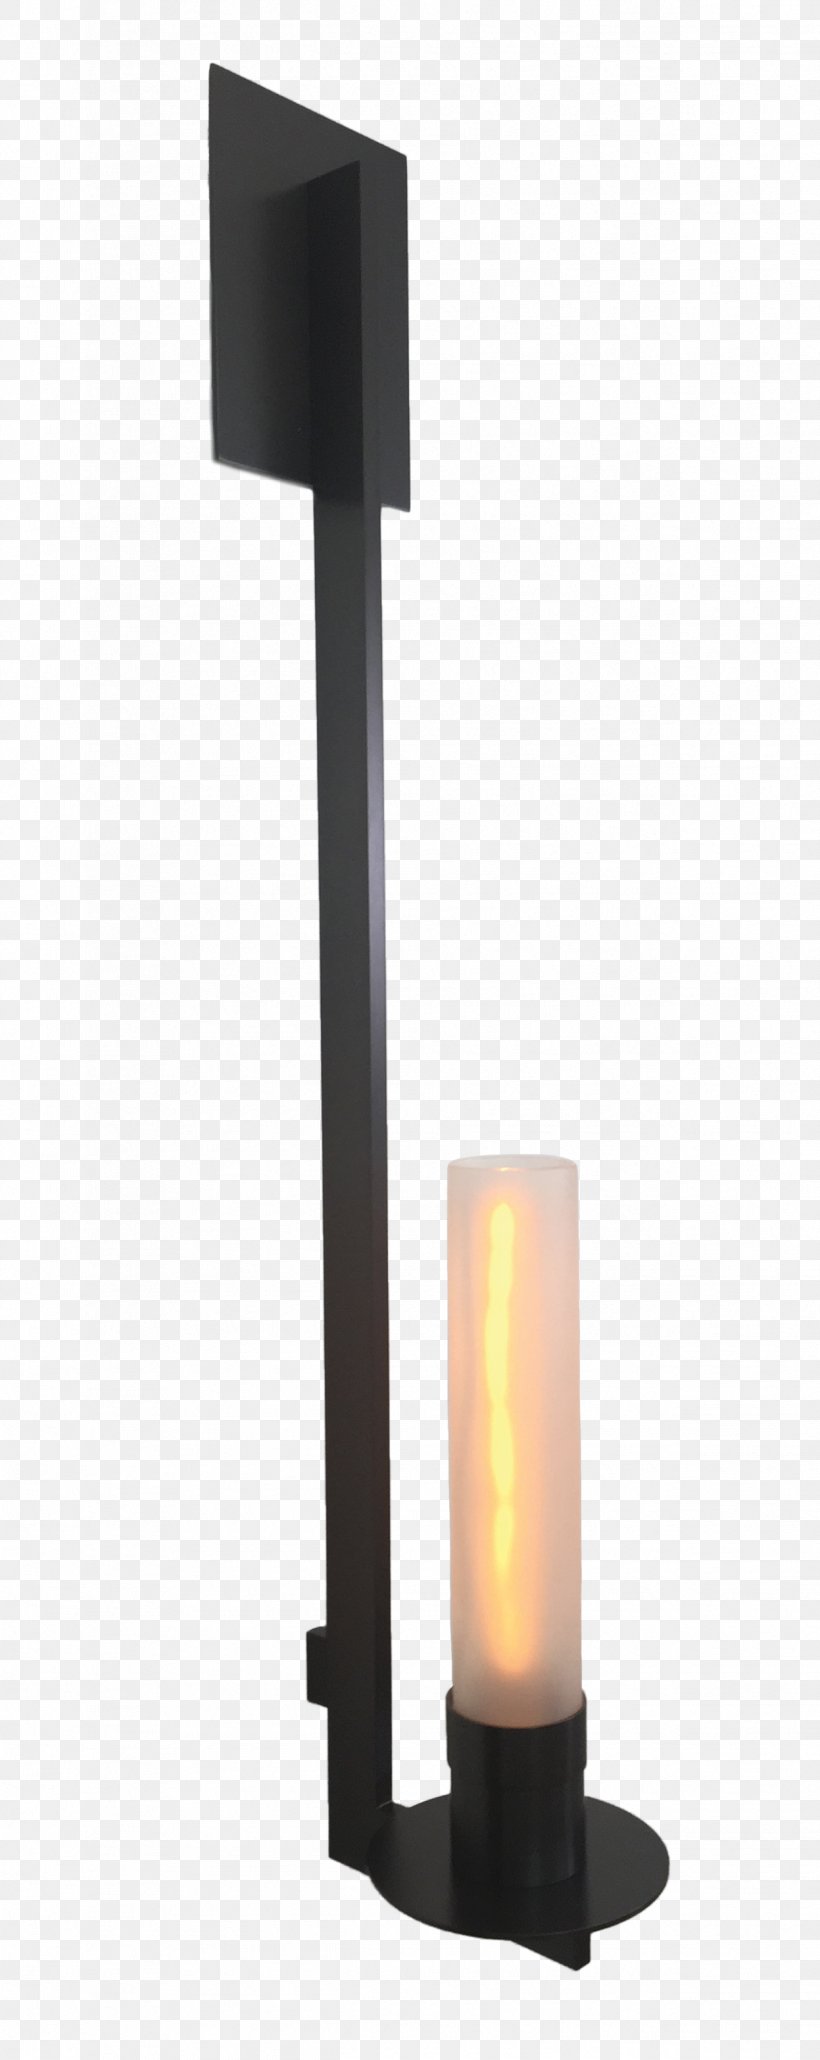 Ceiling Light Fixture, PNG, 1247x3133px, Ceiling, Ceiling Fixture, Heat, Light Fixture, Lighting Download Free